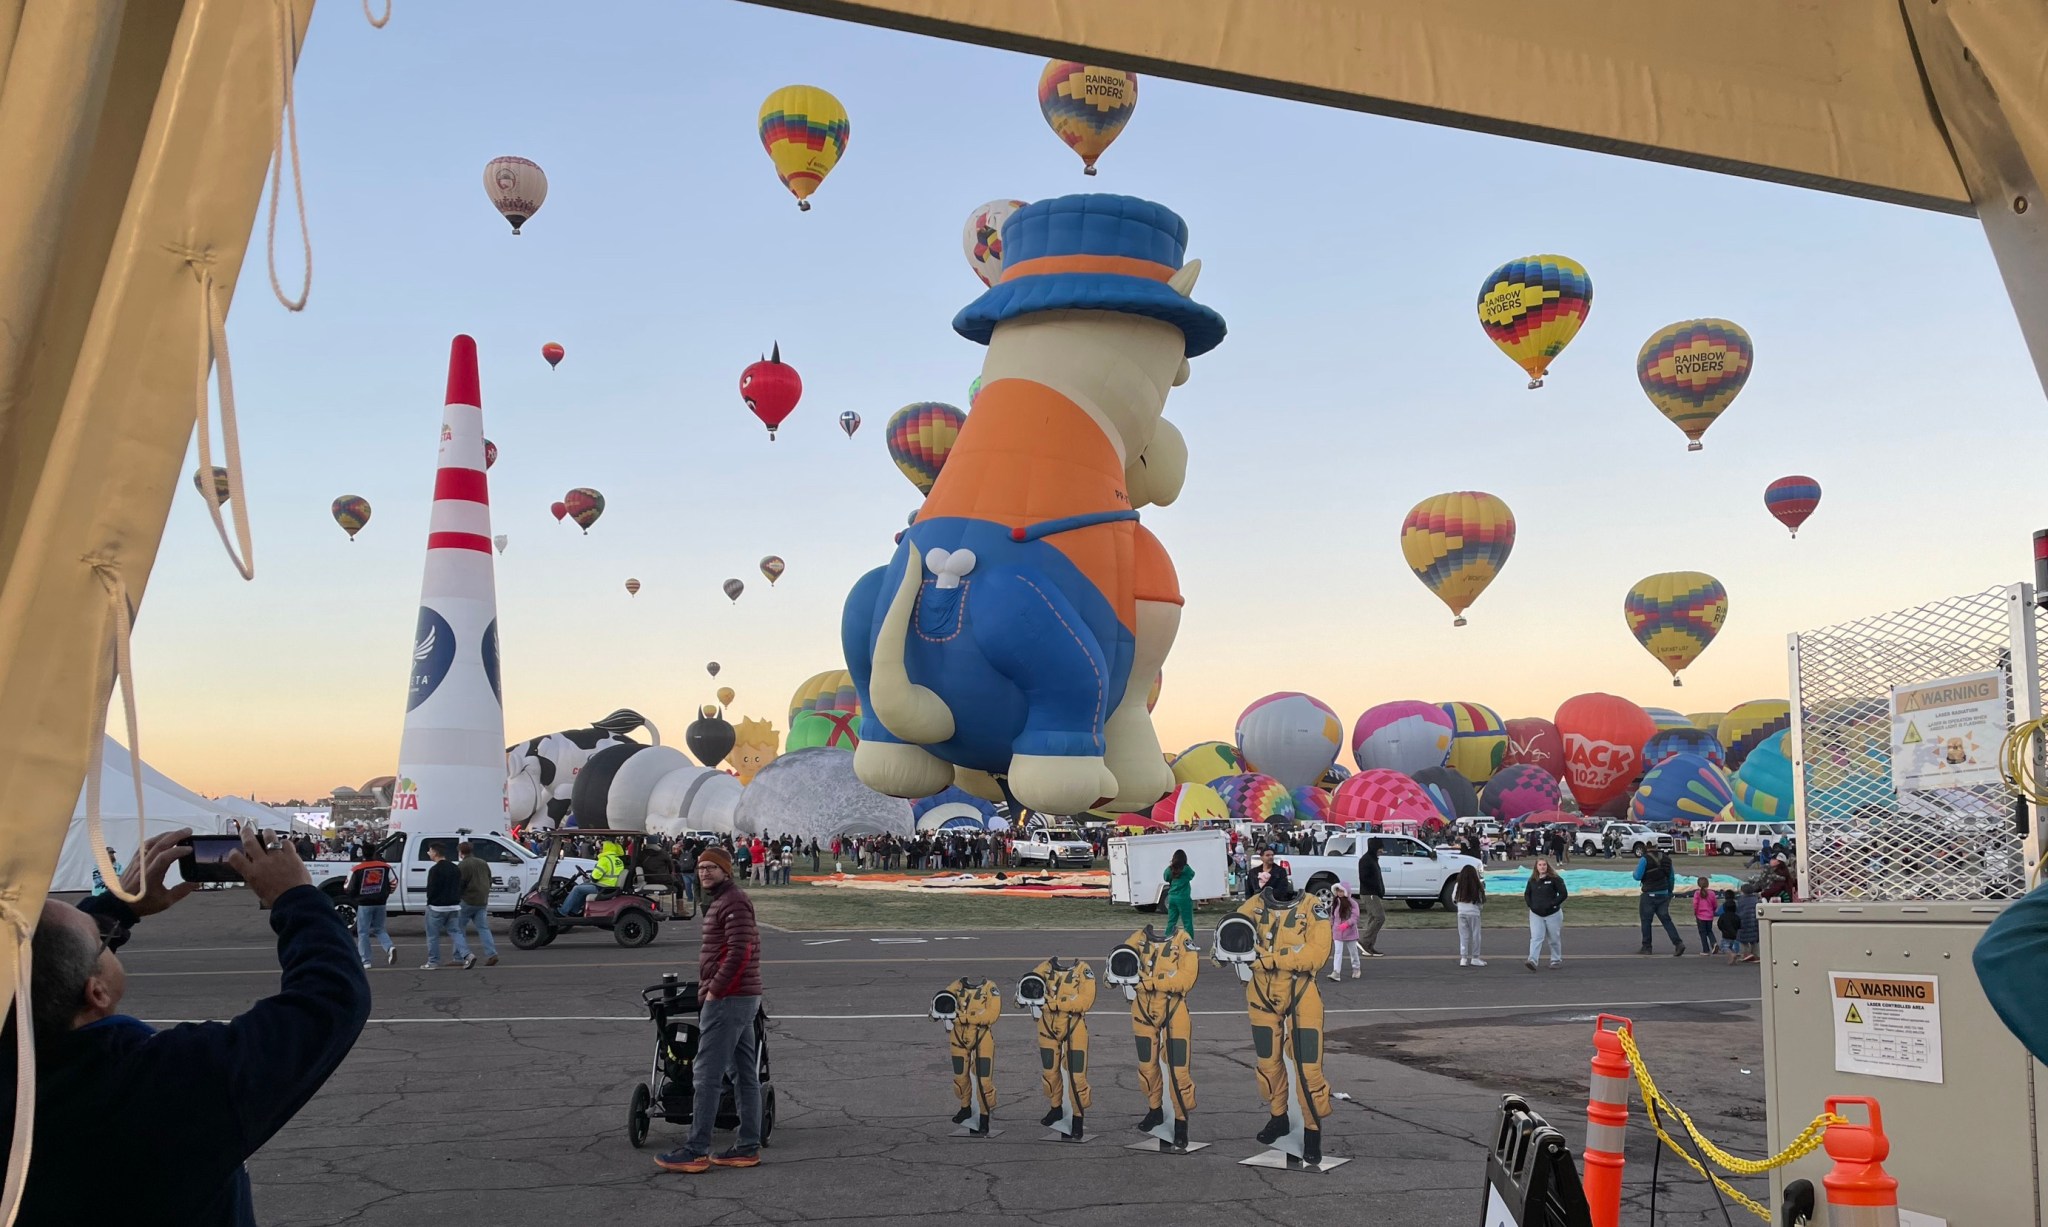 Colorful hot air balloons fill the sky as astronaut photo cutouts stand on the ground.